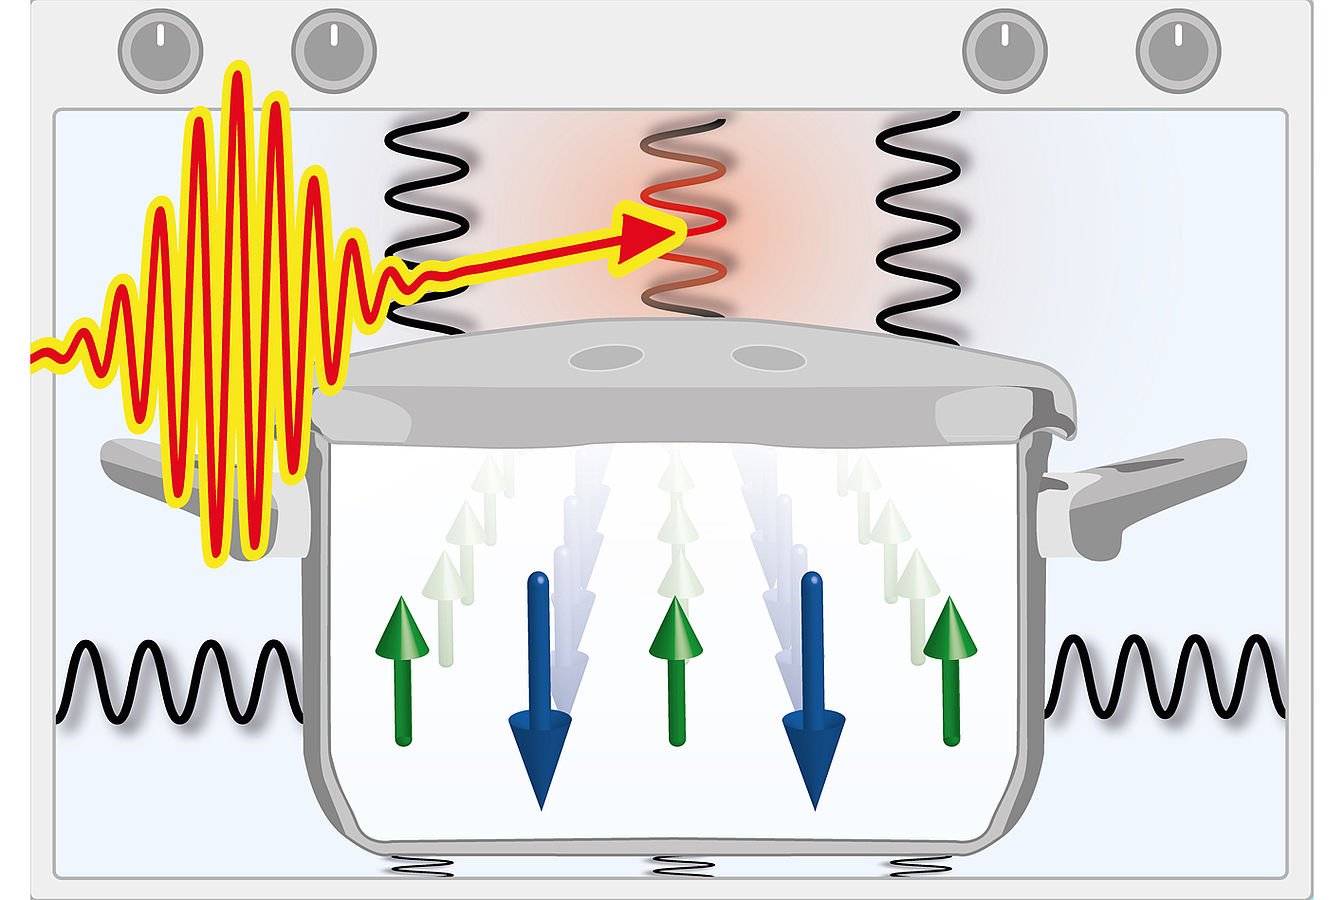 What happens when we heat the atomic lattice of a magnet all of a sudden?